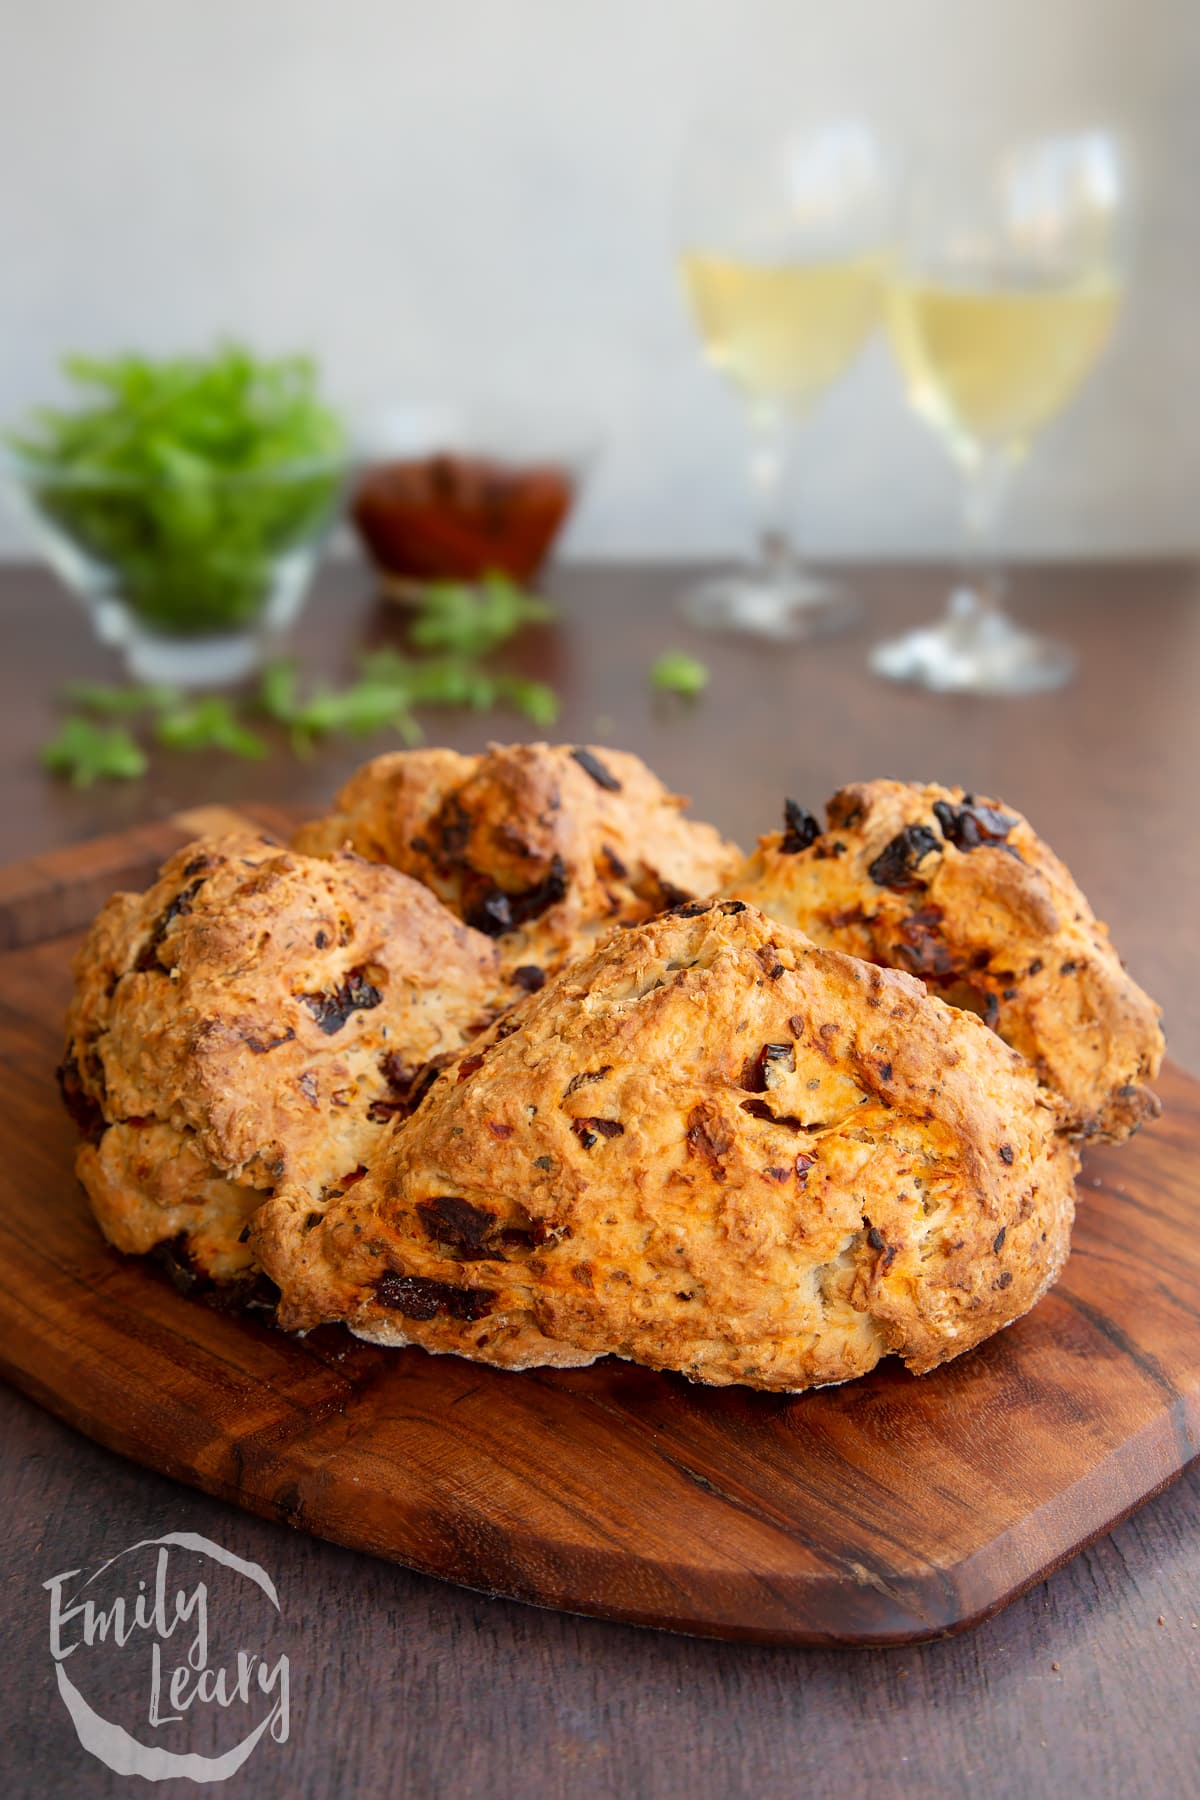 Sundried tomato soda bread loaf on a wooden board.